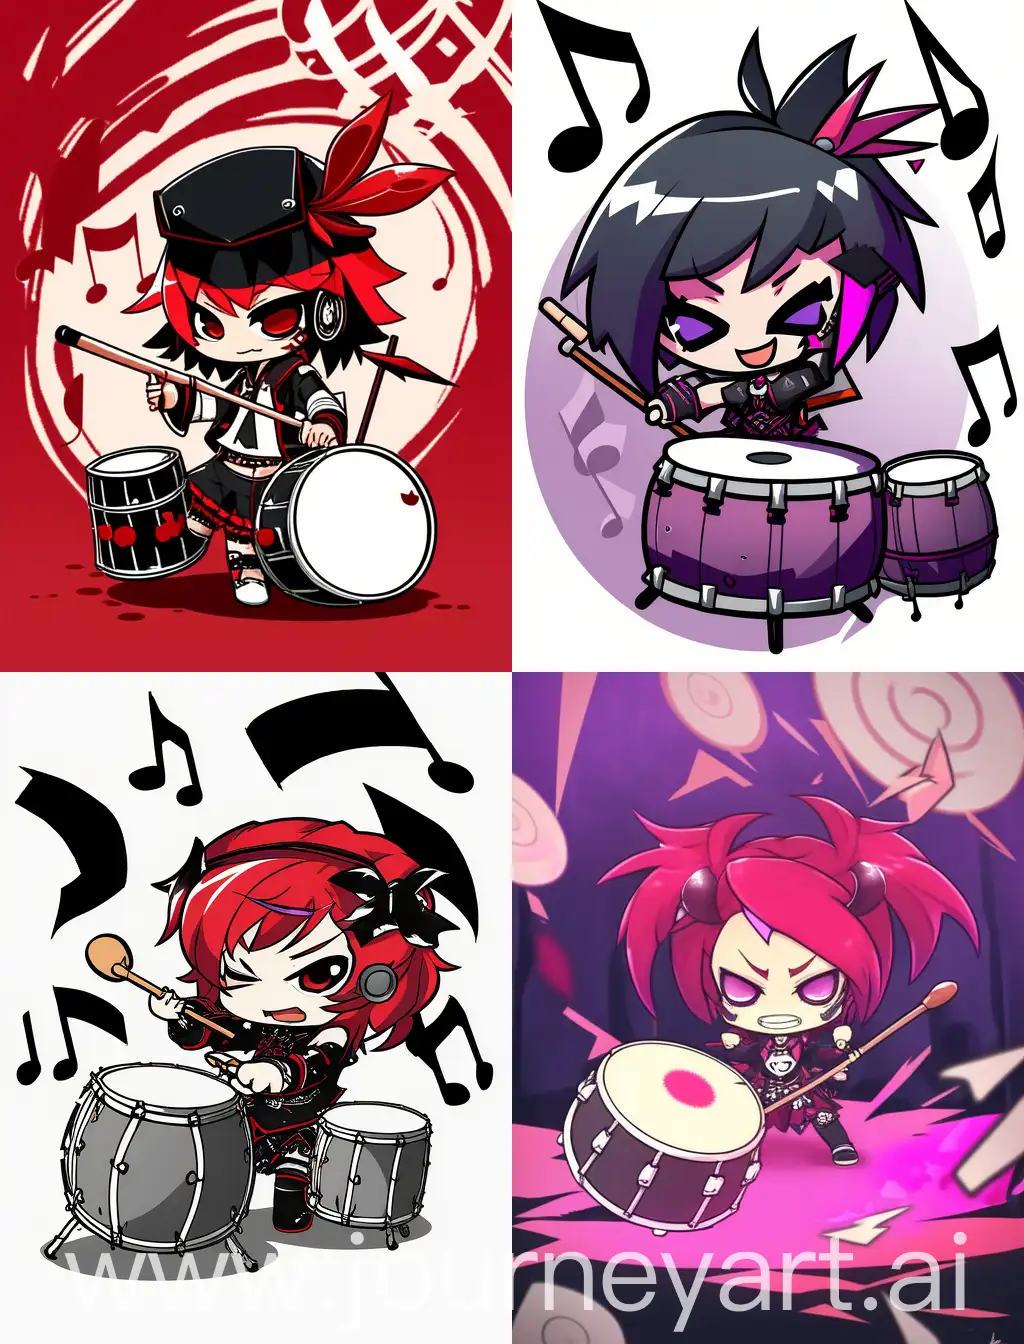 Chibi-Emo-Girl-Playing-Drum-in-Cartoon-Anime-Style-with-Strong-Lines-on-Horror-Background